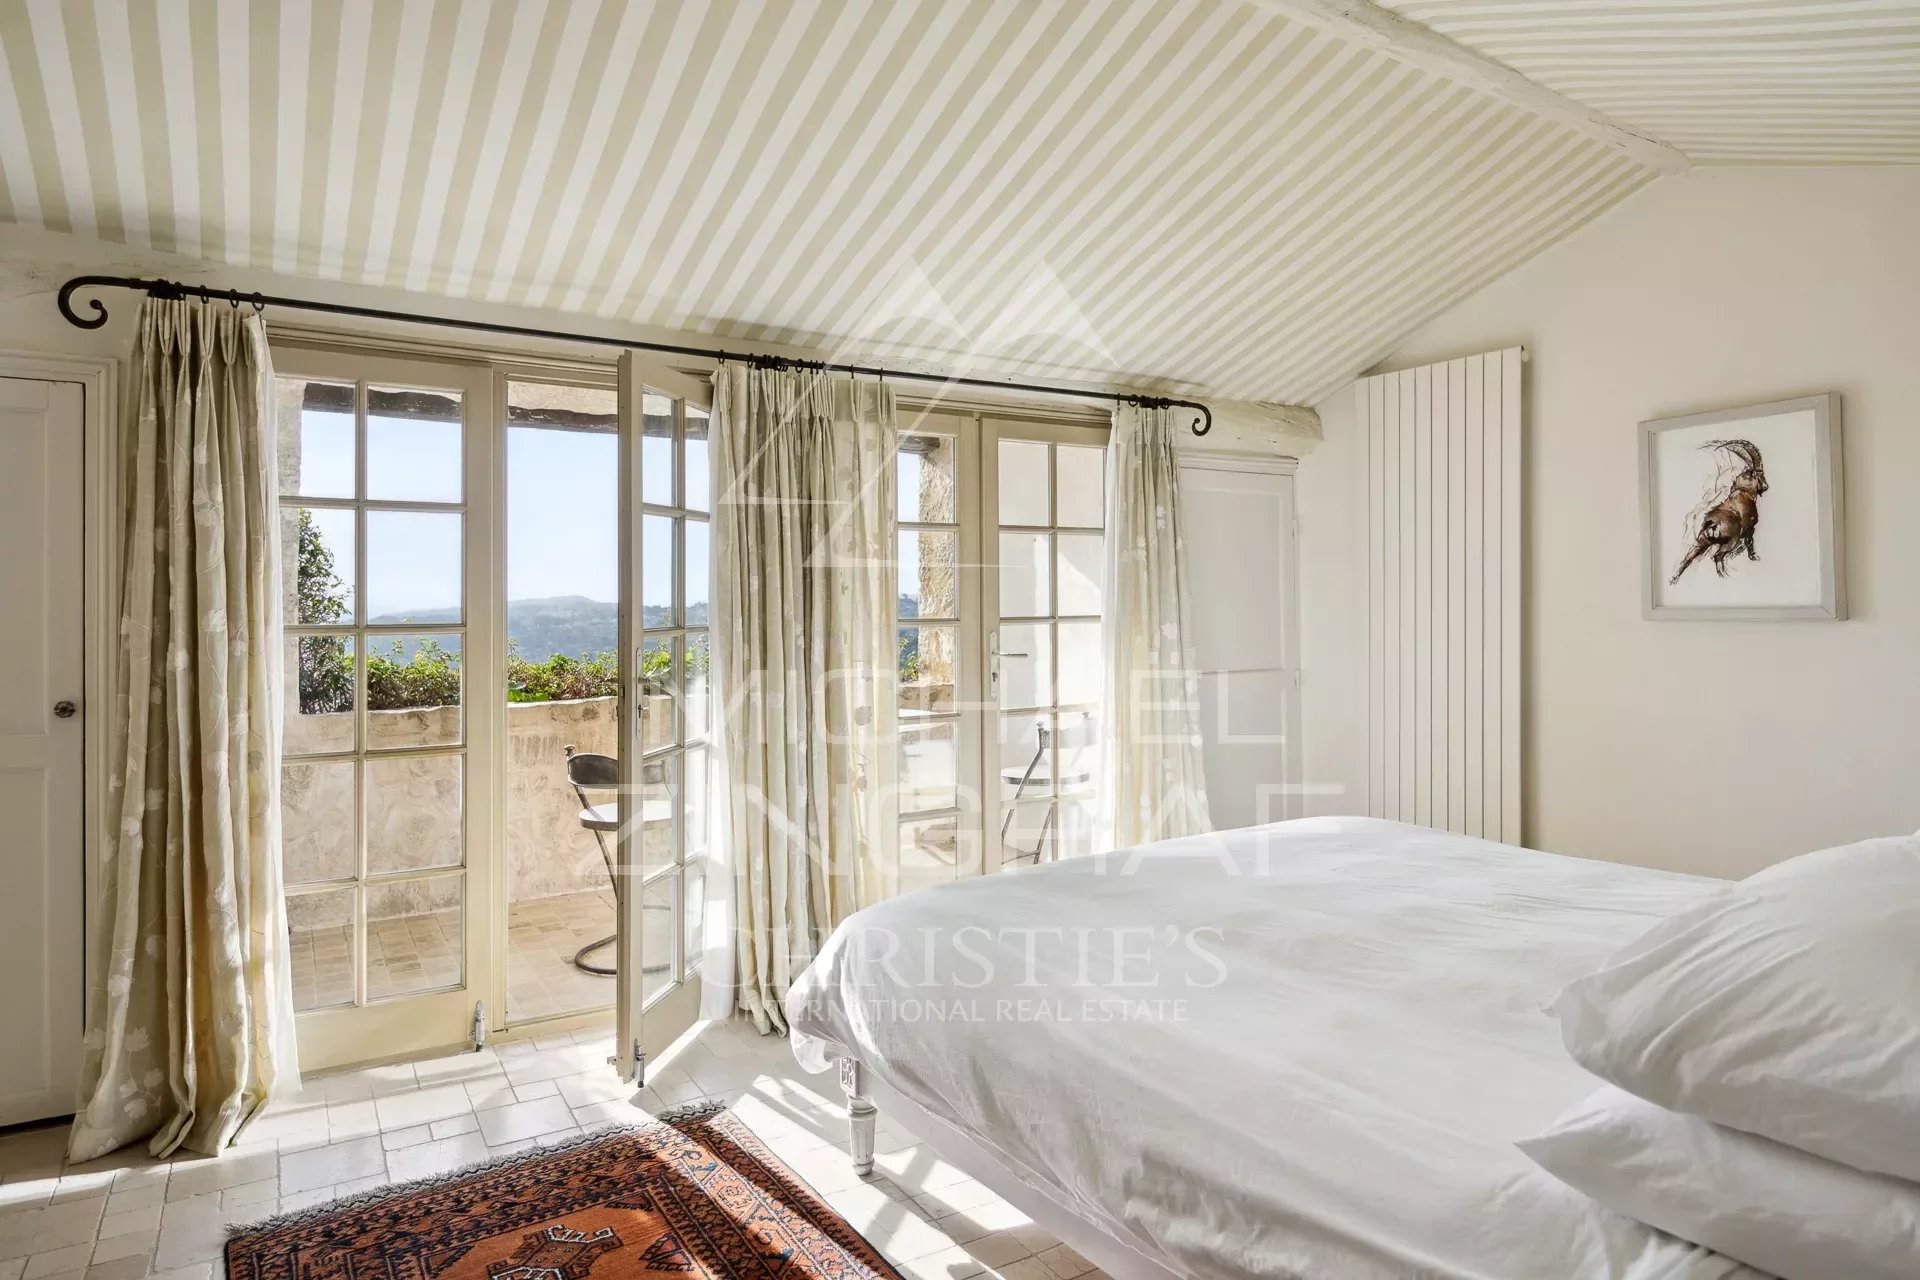 Elegant bastide overlooking the Cannes countryside